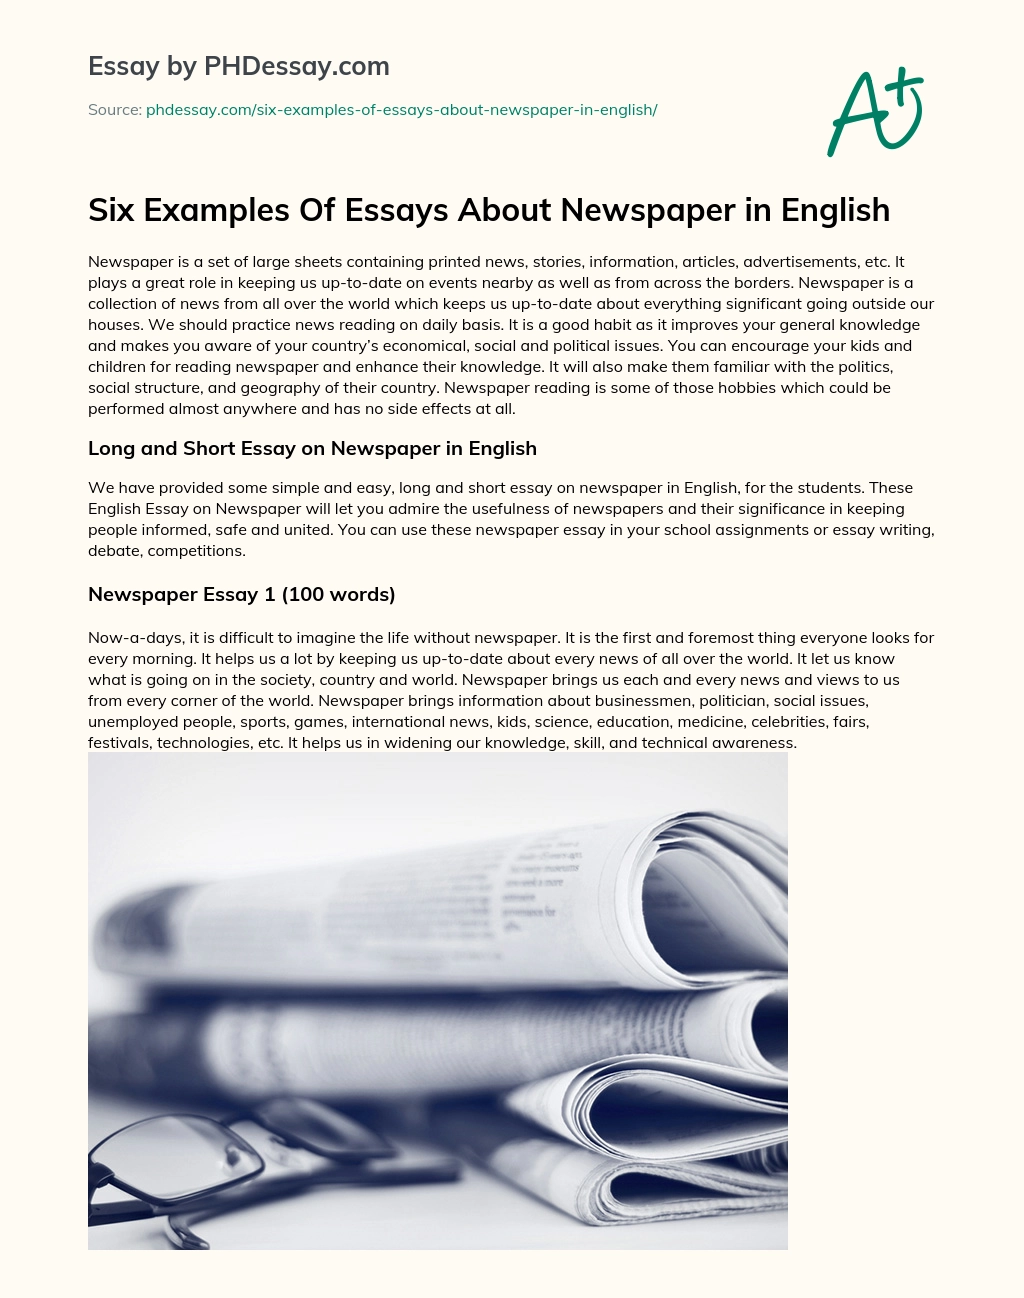 Six Examples Of Essays About Newspaper in English essay